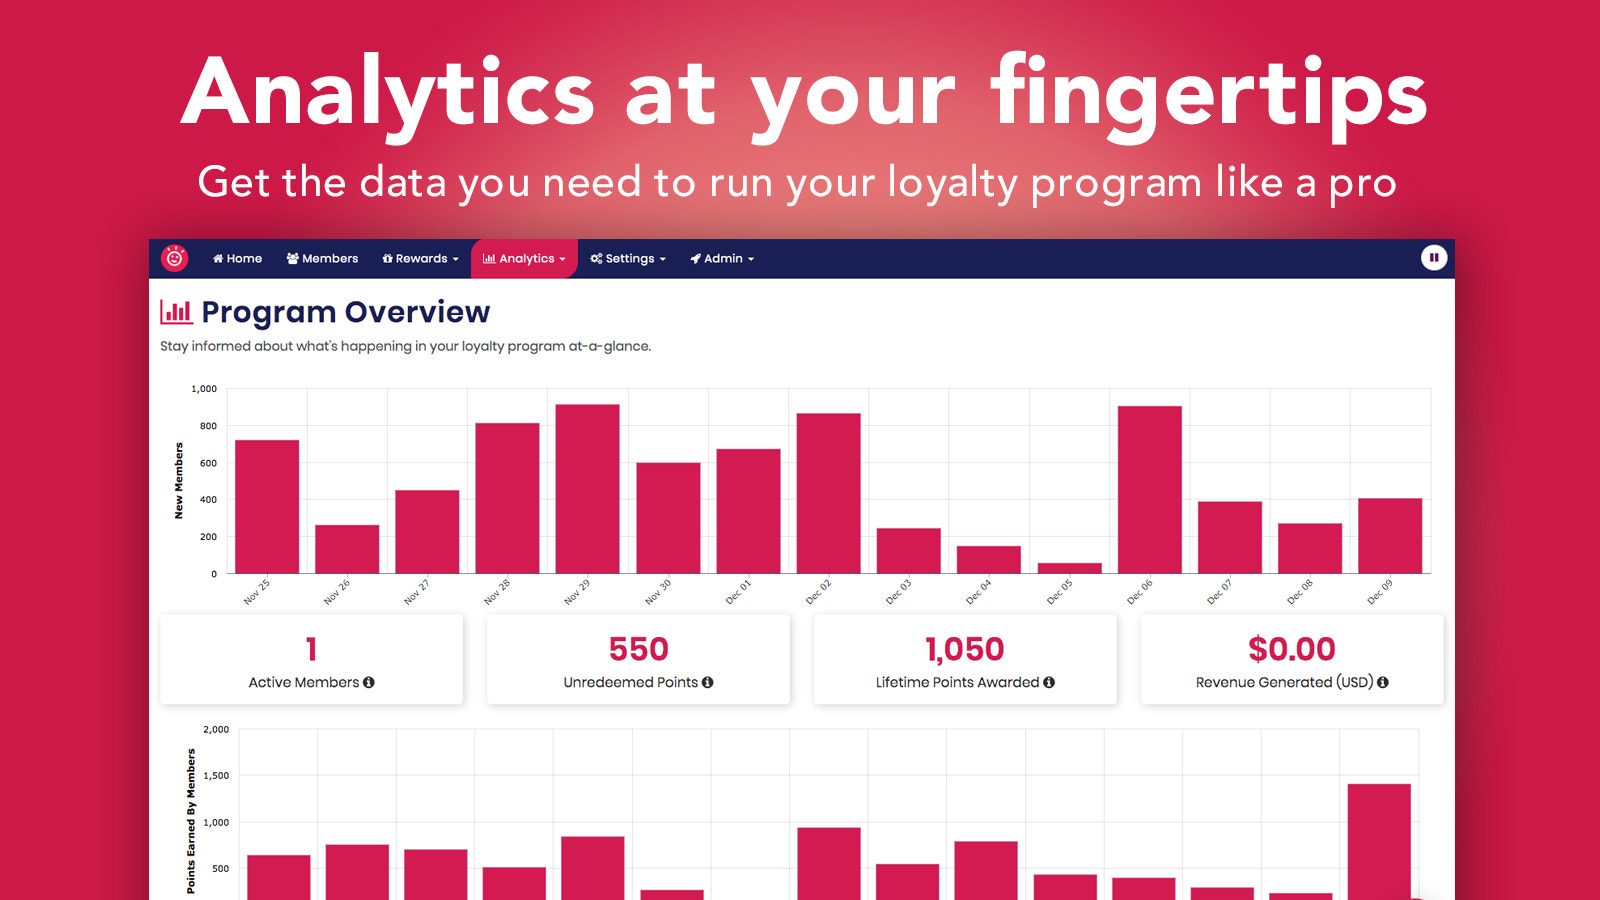 Analytics at your fingertips